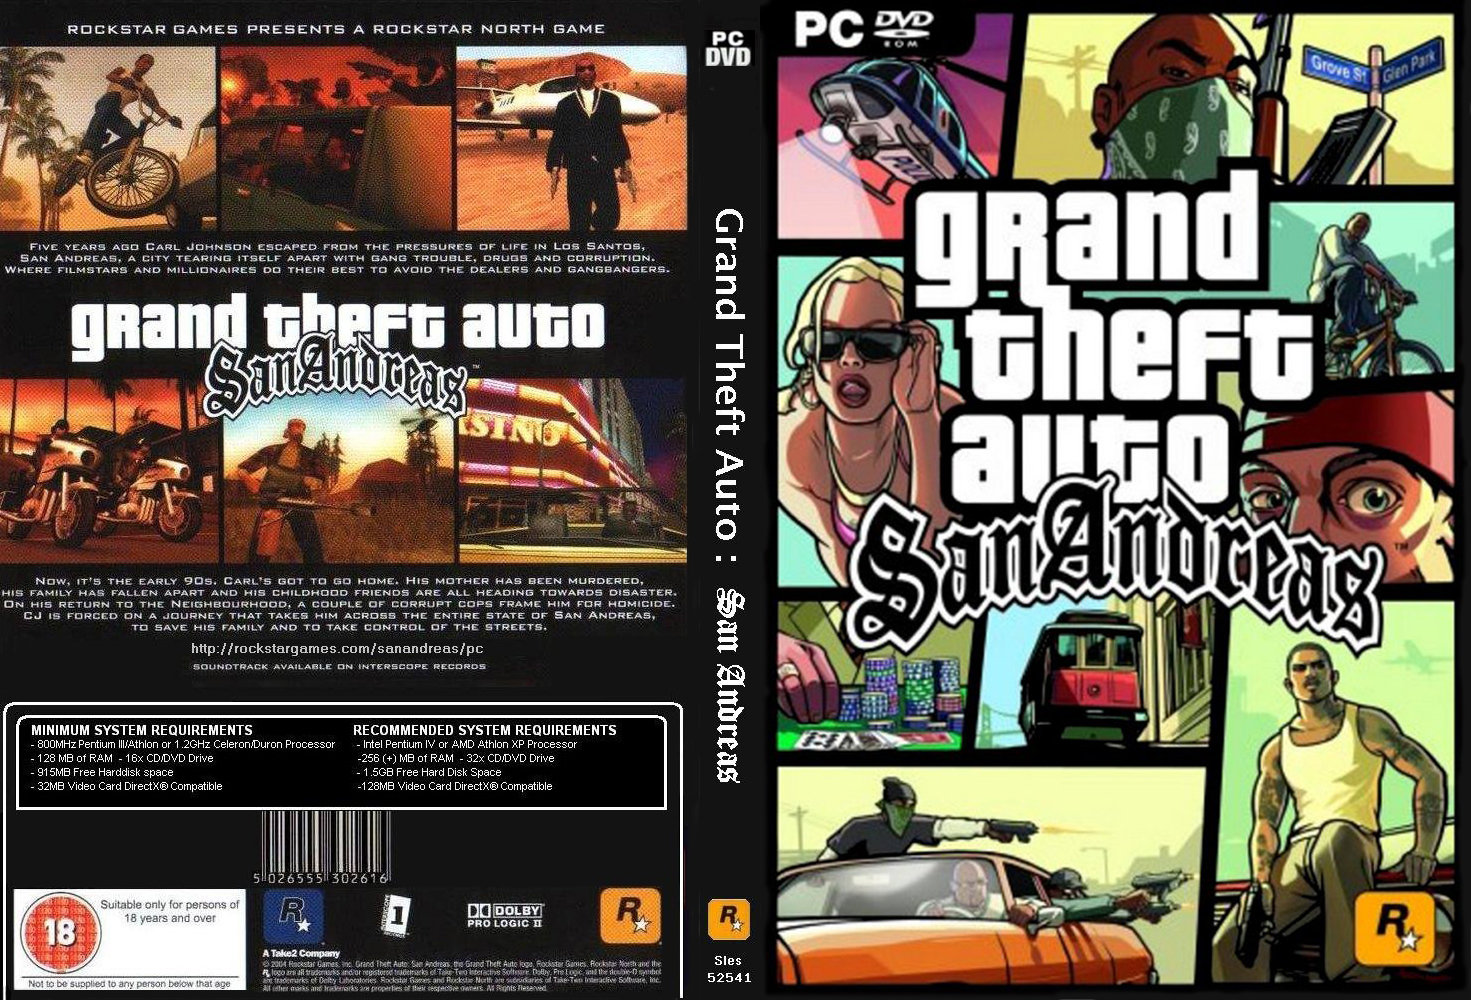 Grand_Theft_Auto_San_Andreas_Dvd_pc_front.jpg